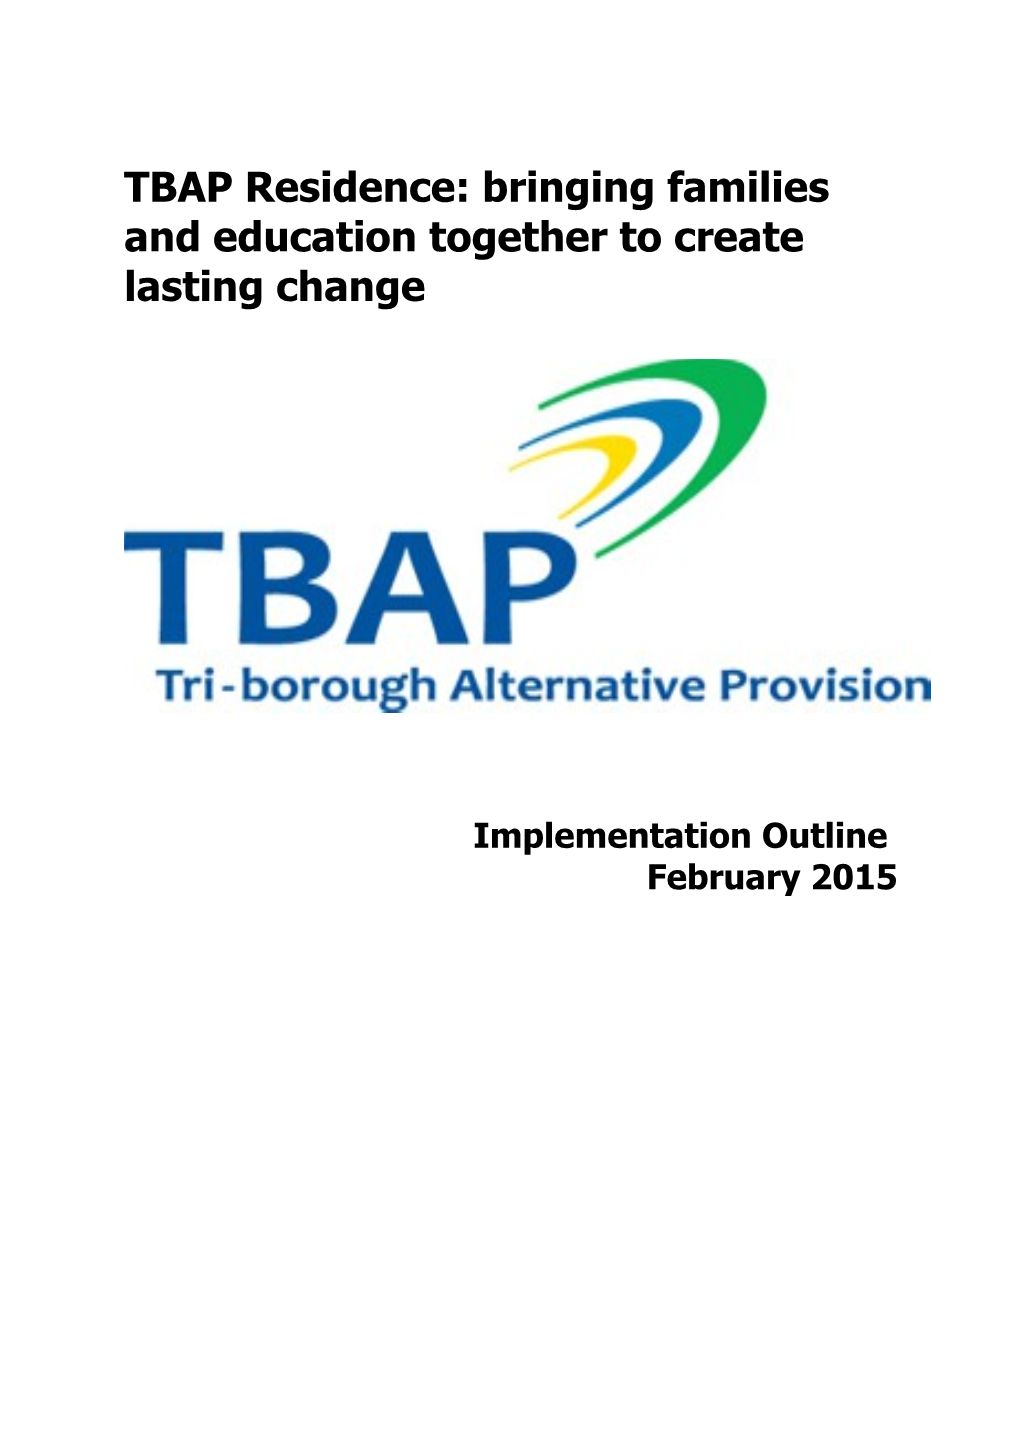 TBAP Residence: Bringing Families and Education Together to Create Lasting Change